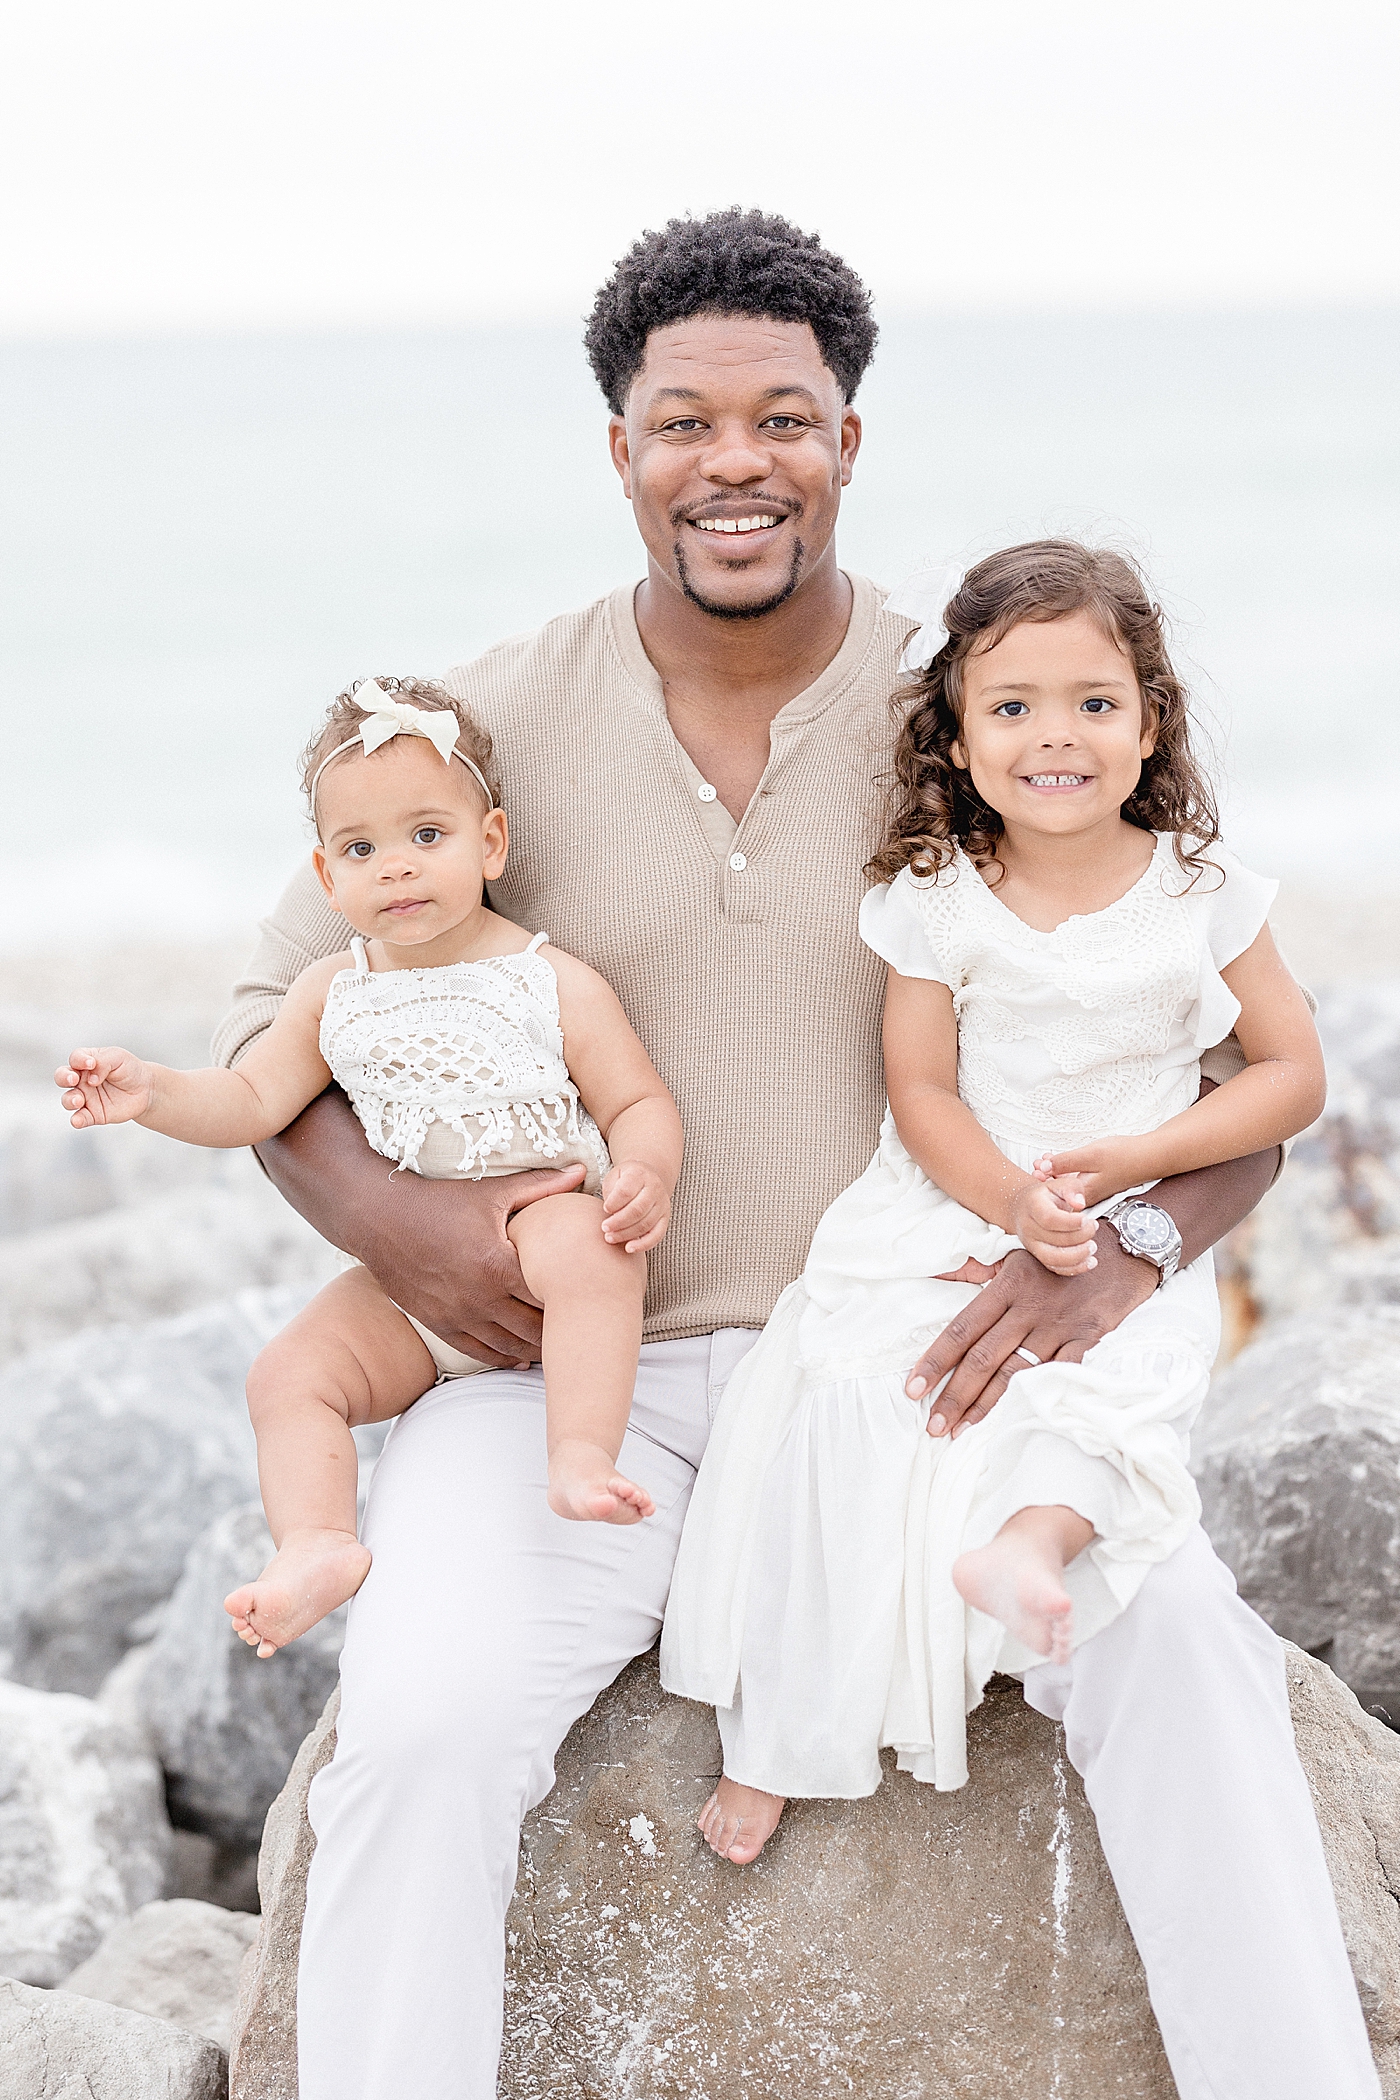 Daddy and his two girls. Photo by Brittany Elise Photography.